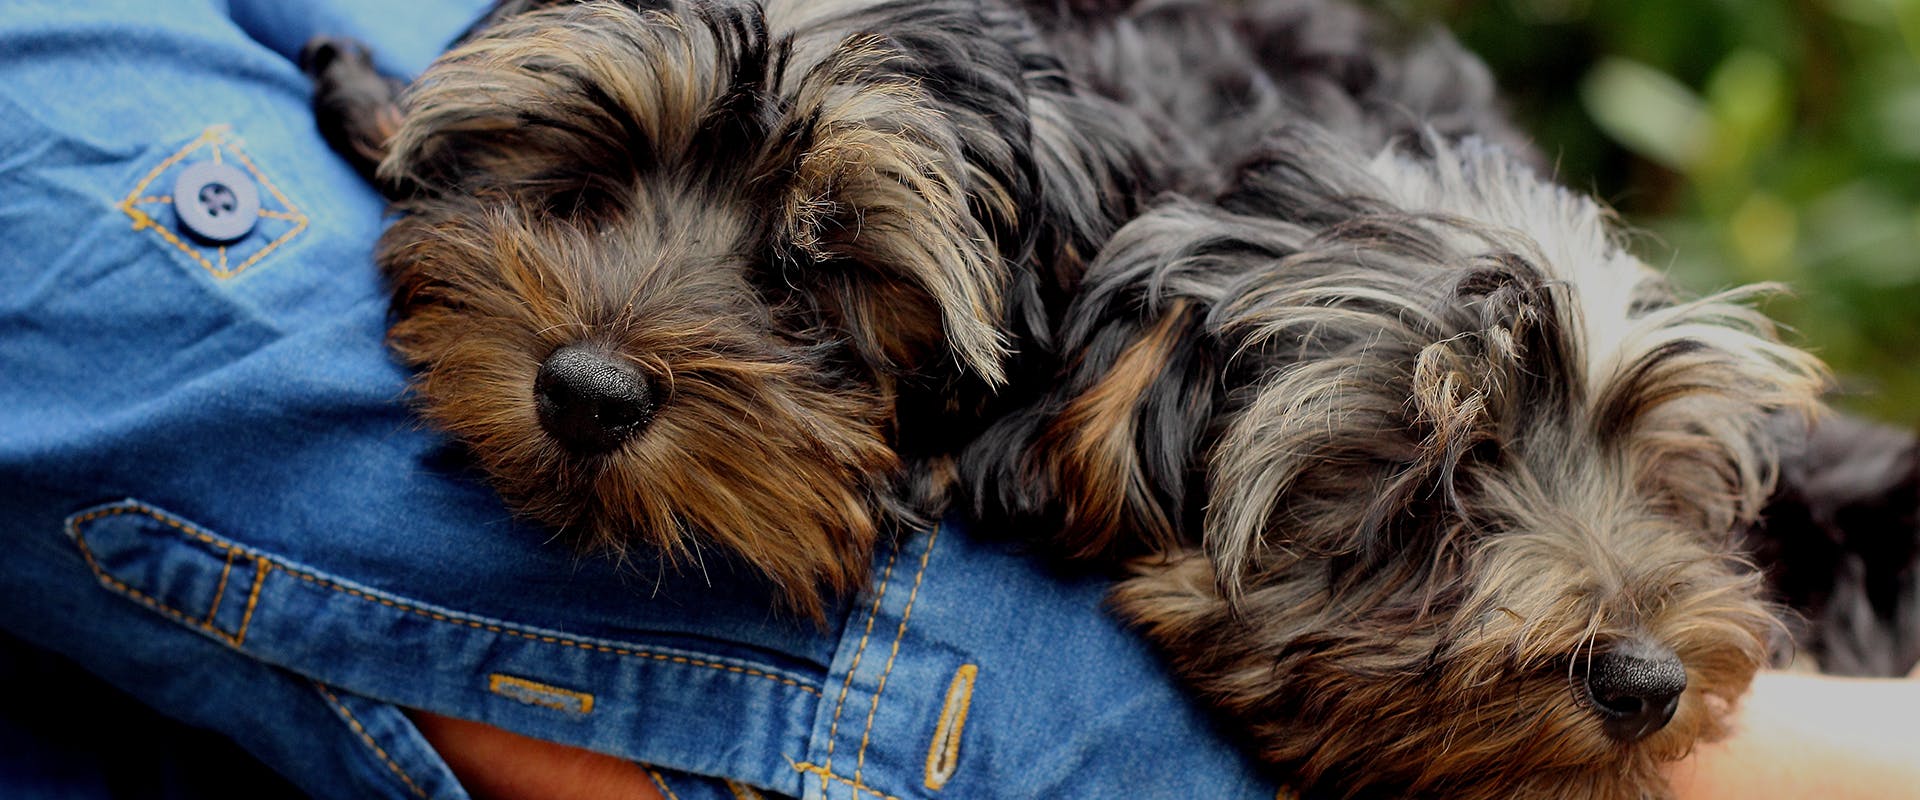 A person wearing a denim jacket holding two sleeping Yorkiepoo puppies in their arms